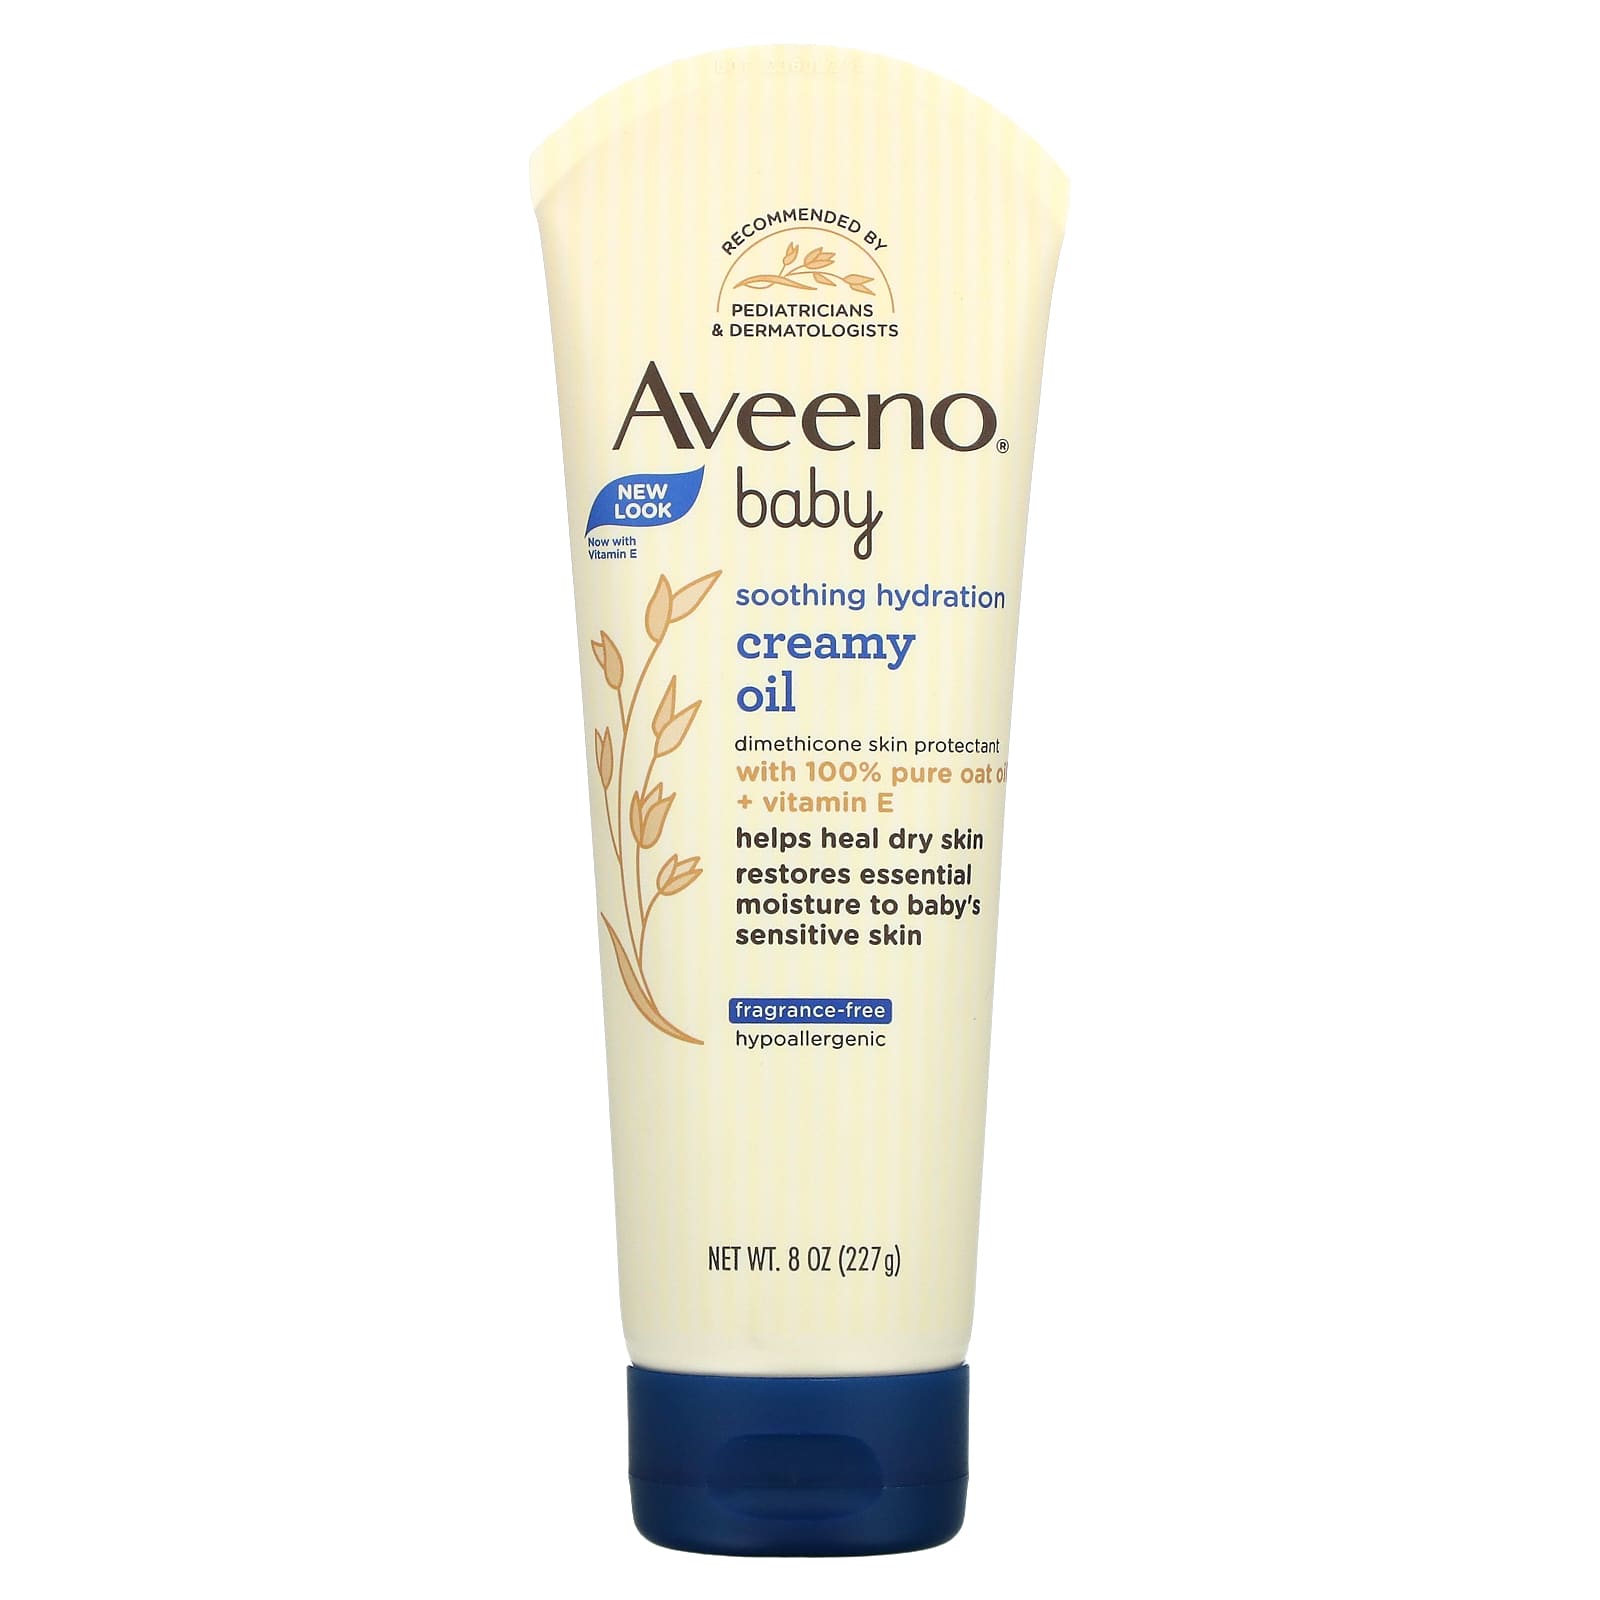 Aveeno, Baby, Soothing Hydration Creamy Oil, Fragrance Free